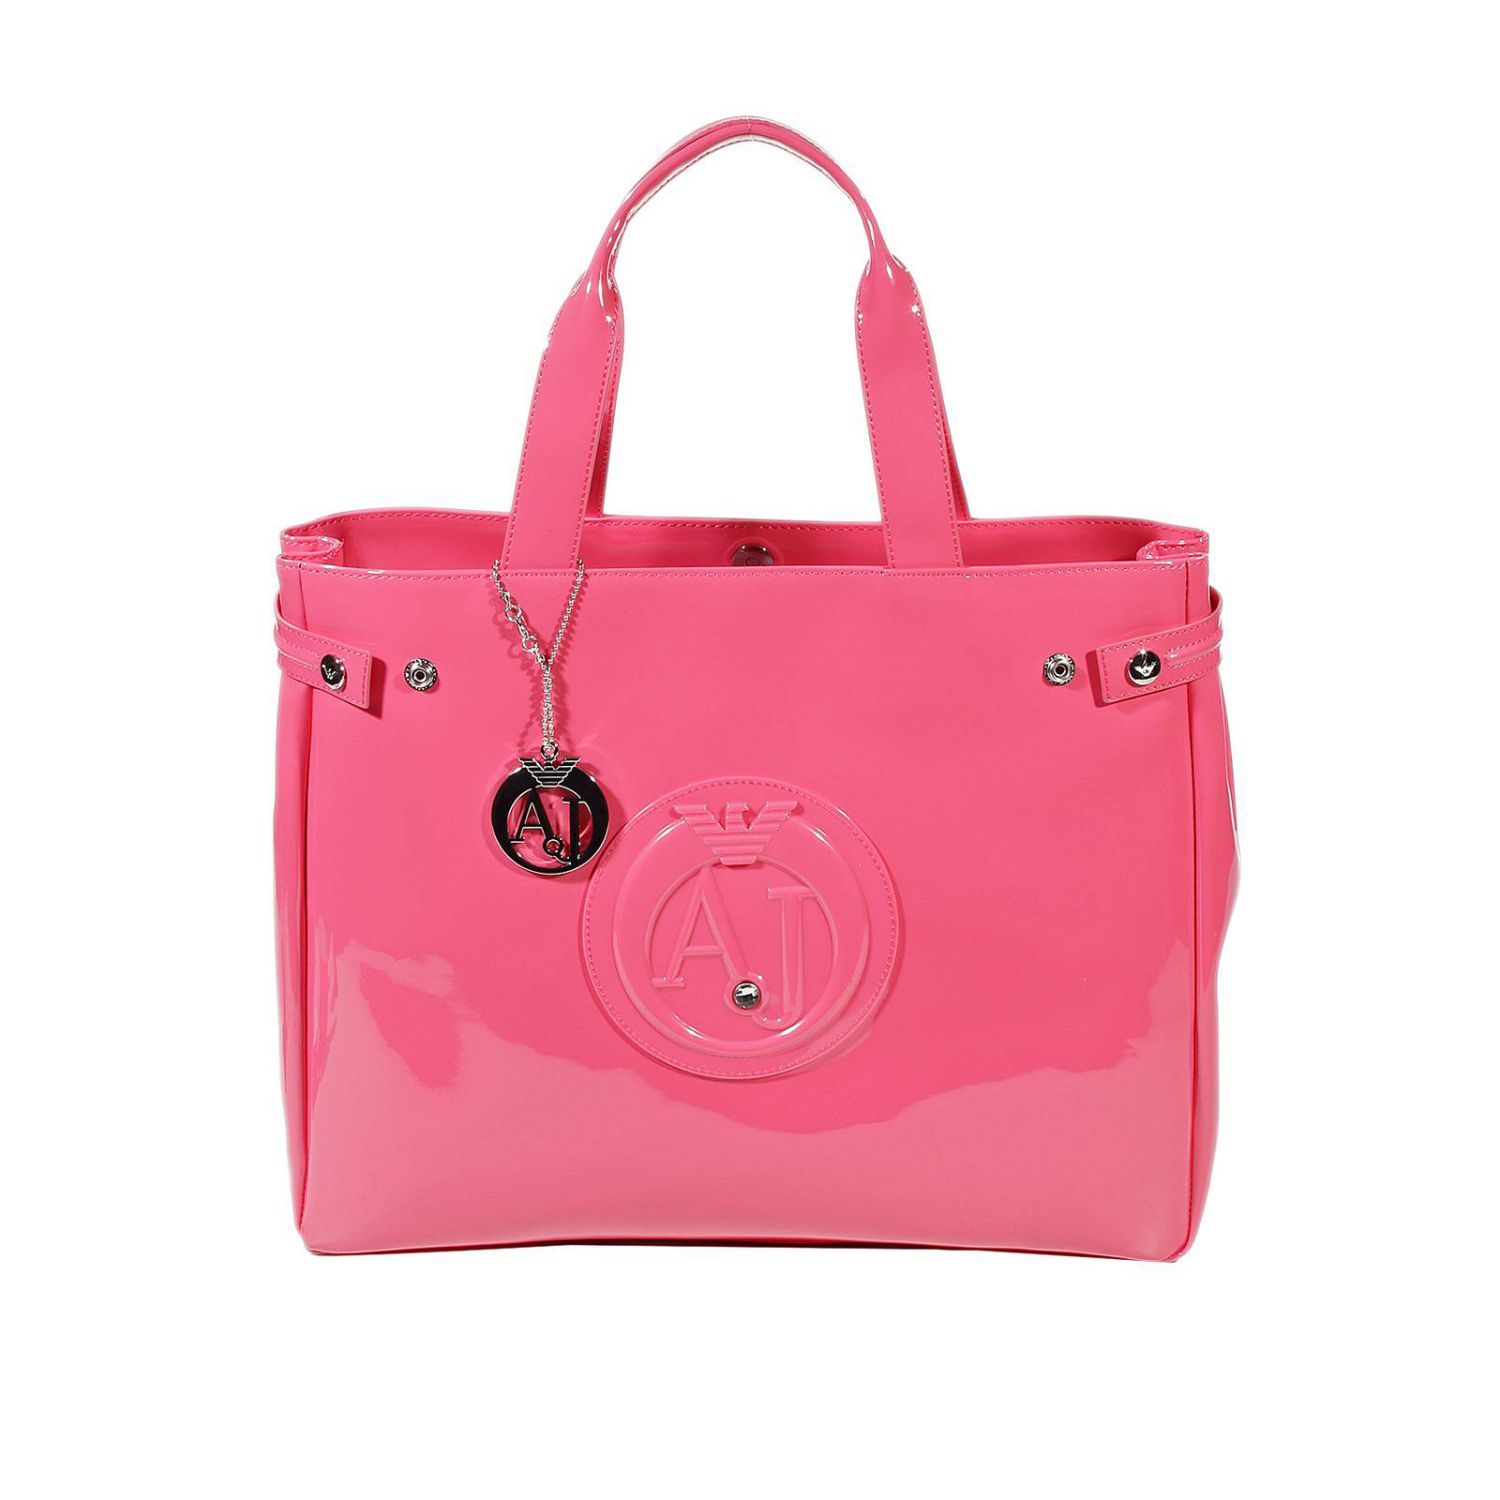 Armani Jeans Handbag Patent Shopping Large in Pink | Lyst